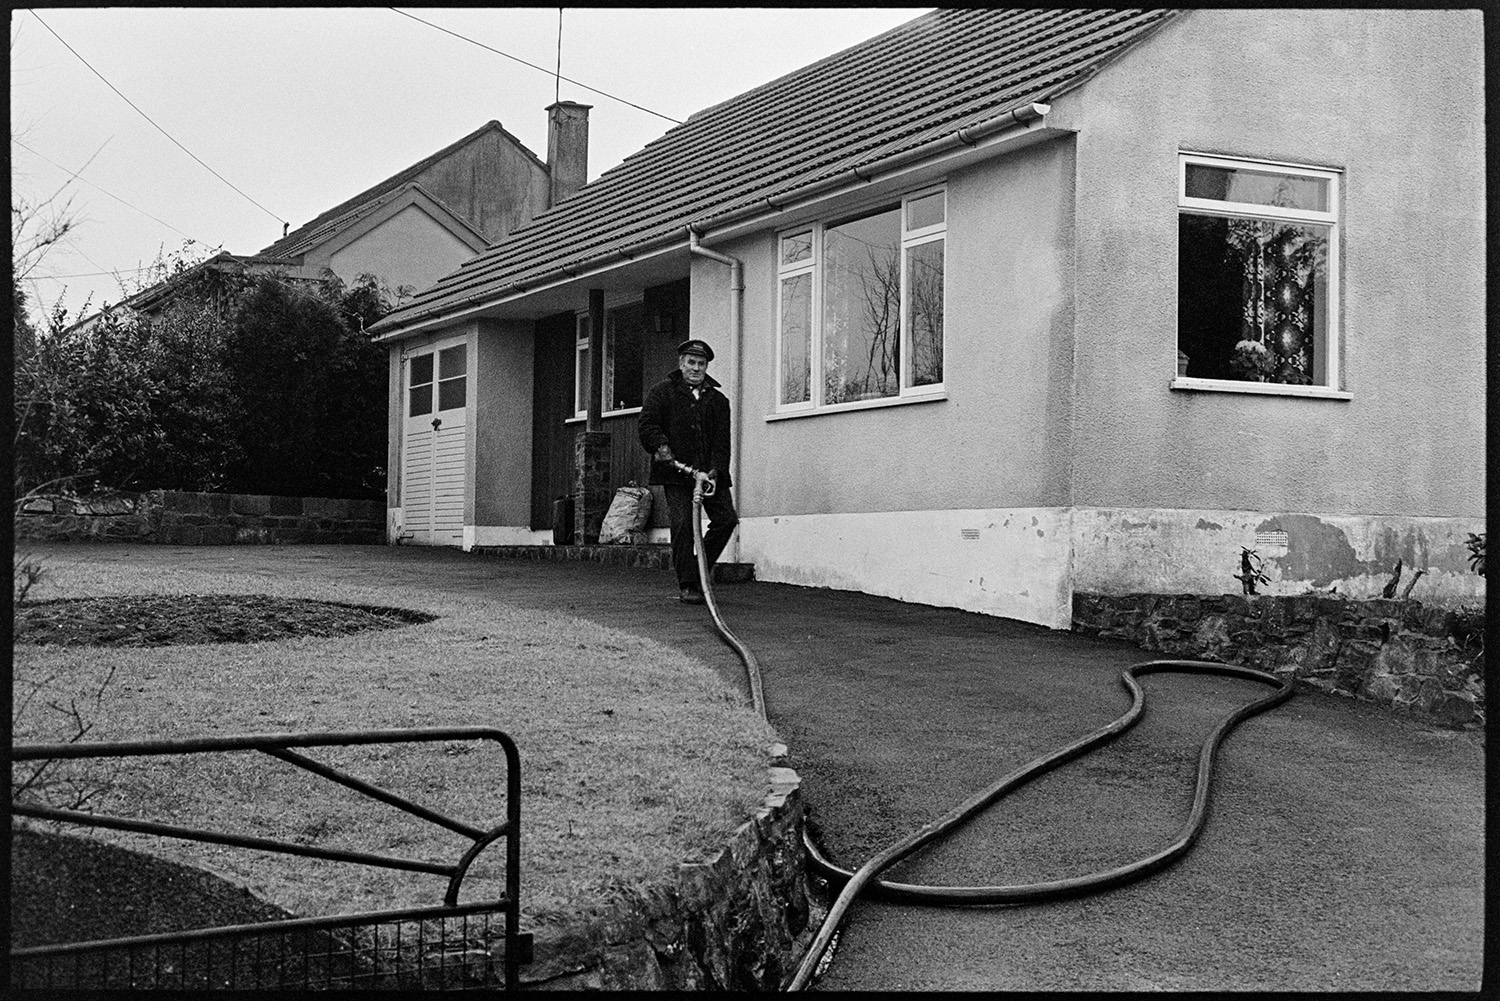 Man connecting hose from fuel oil tanker lorry to house storage. 
[A man running a hose from an Esso fuel tanker to a bungalow in West Lane, Dolton, to fill up the bungalow's oil tank.]